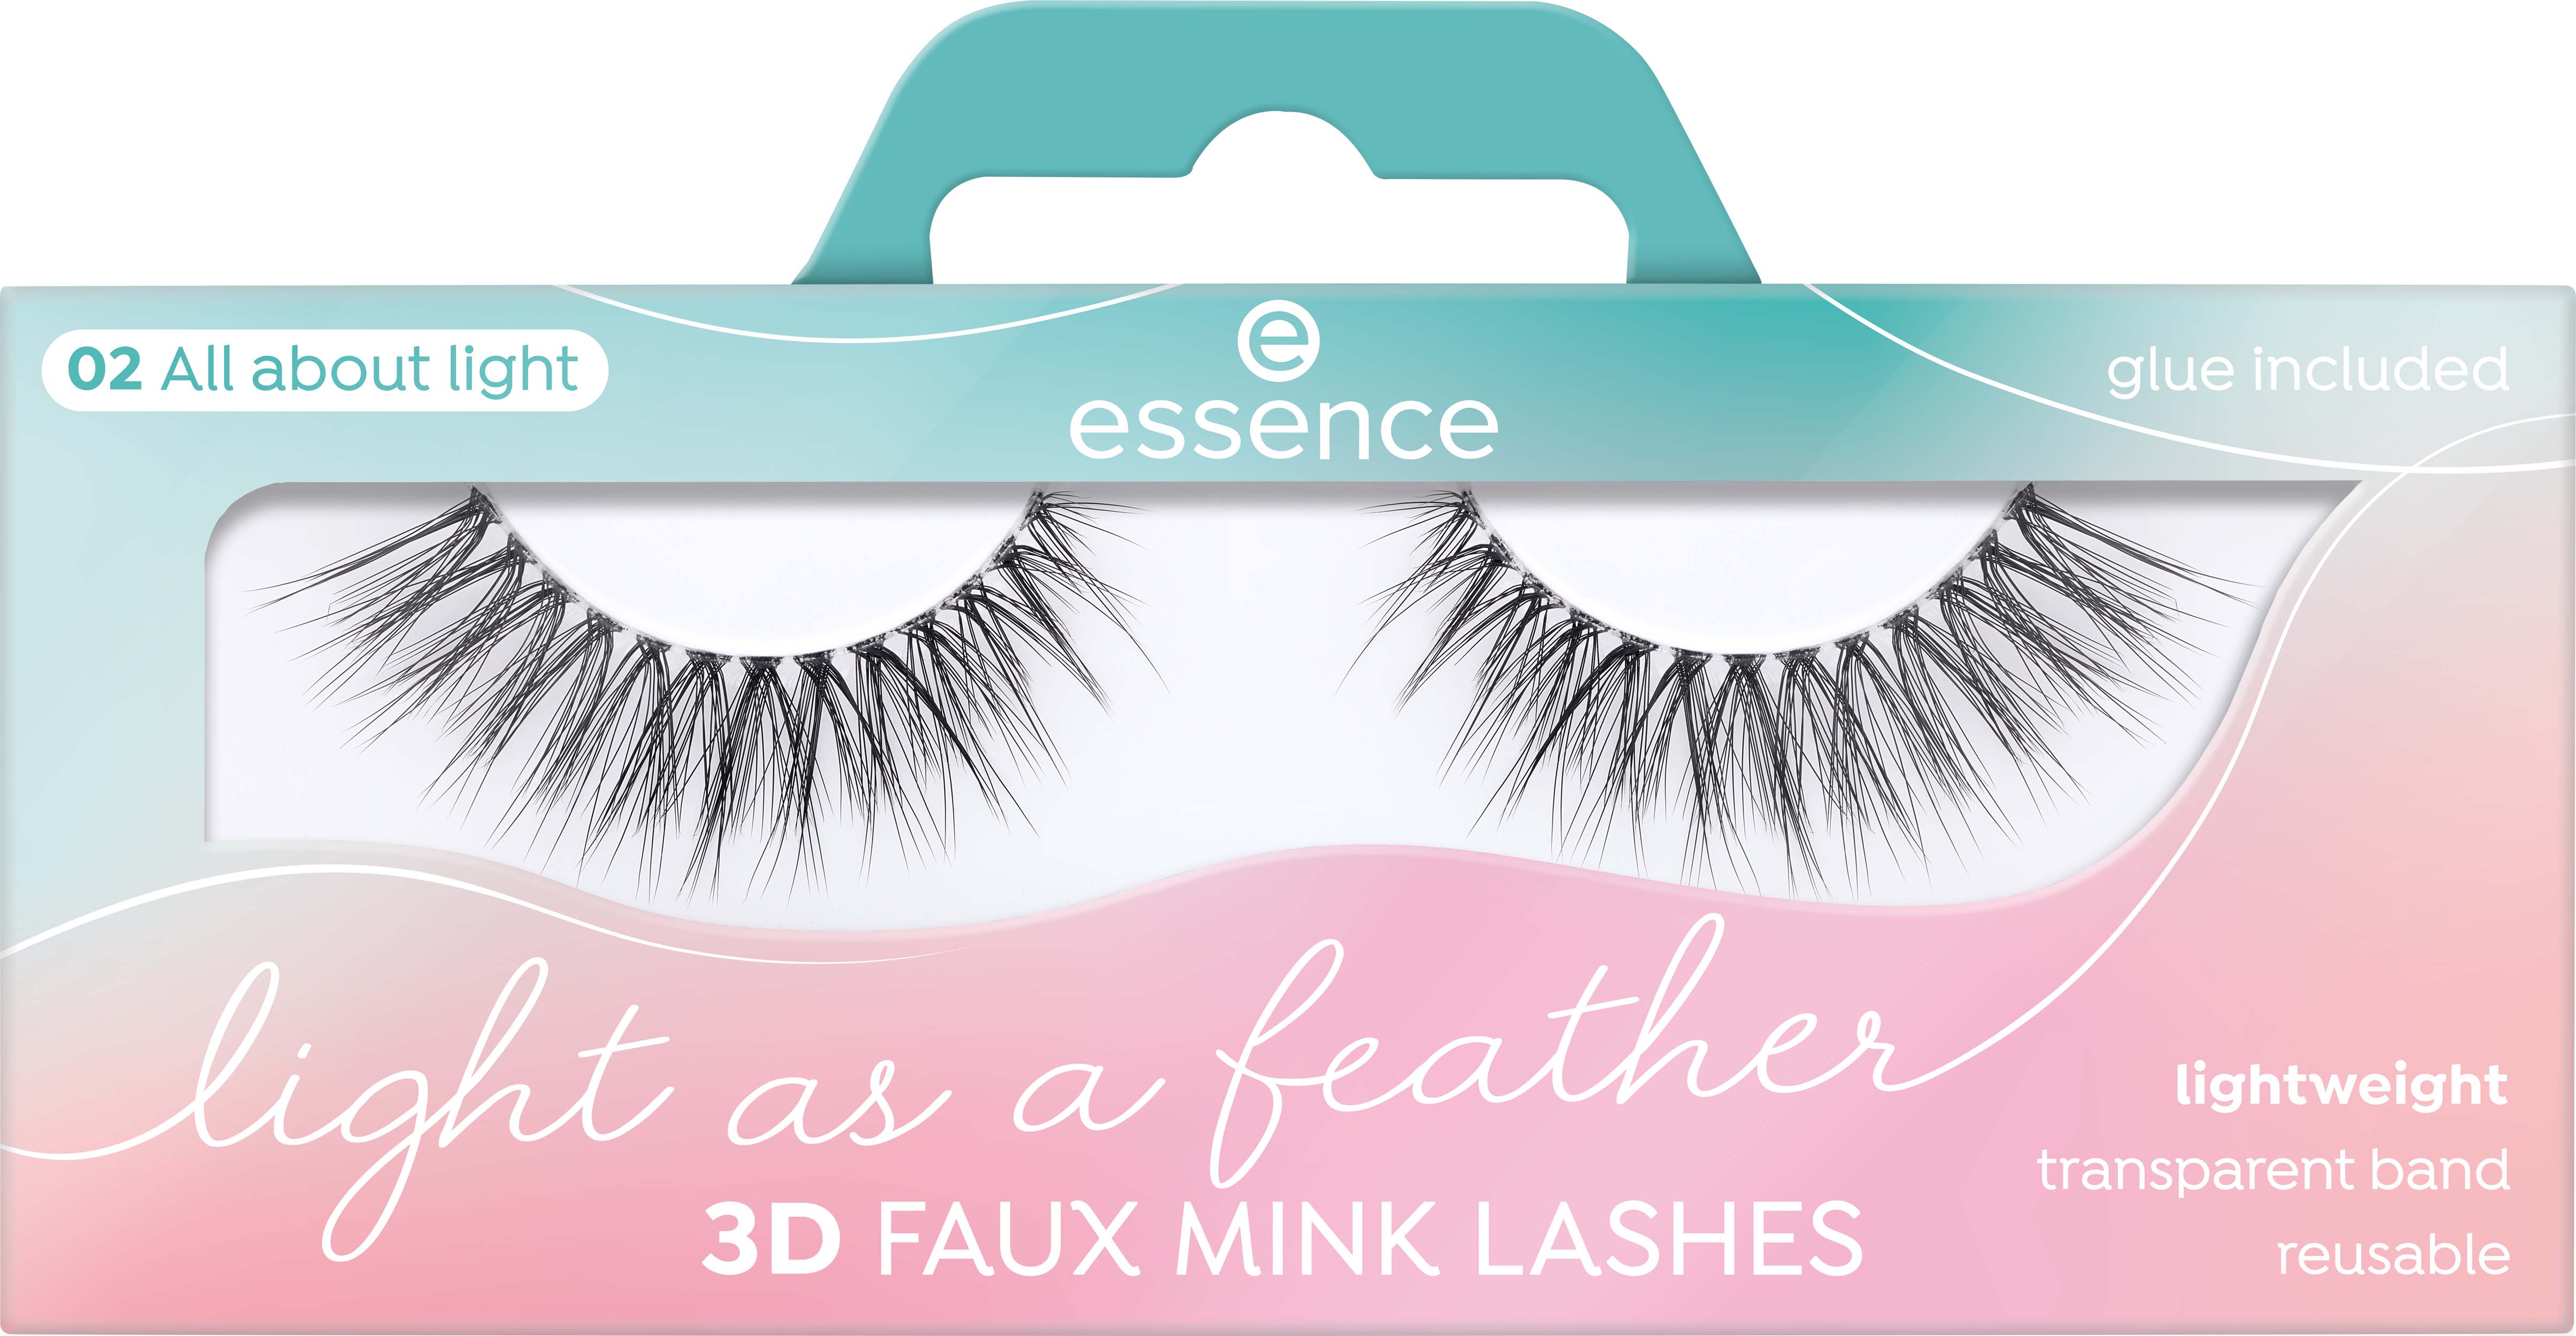 essence Light As A Feather about All Mink light 02 Faux Lashes 3D